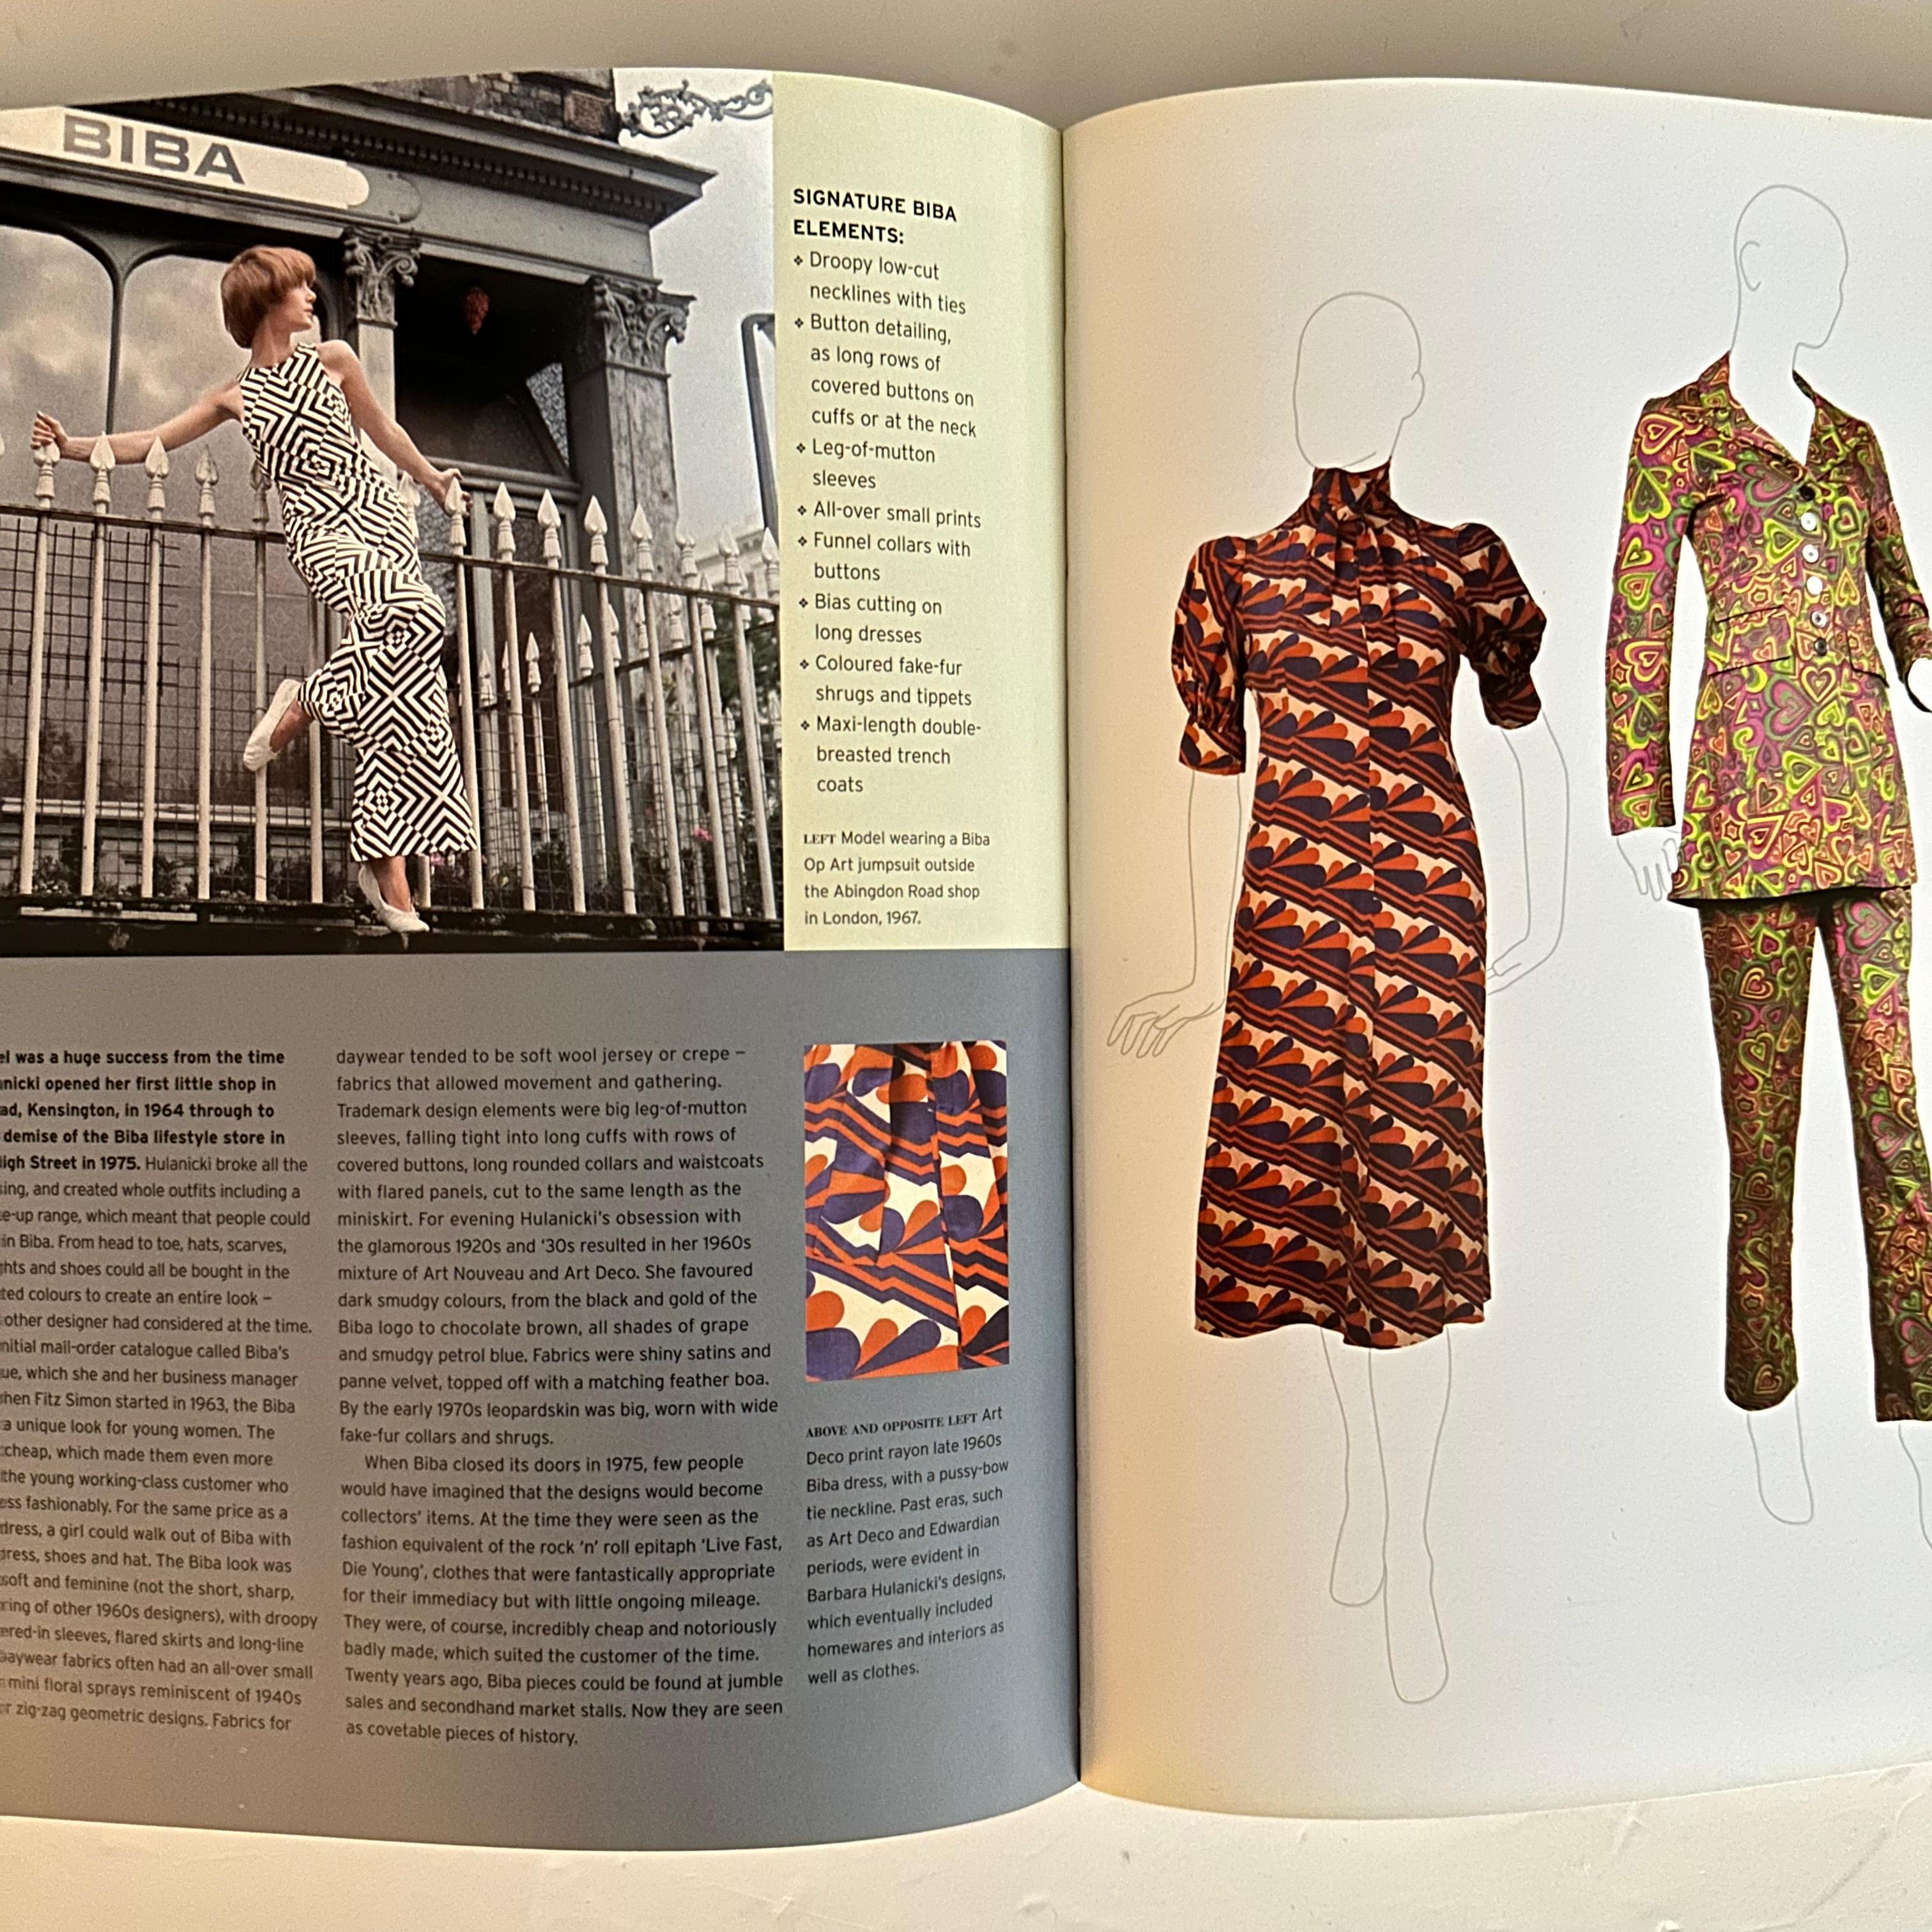 Paper Vintage Fashion: Collecting and Wearing Designer Classics - Emma Baxter Wright